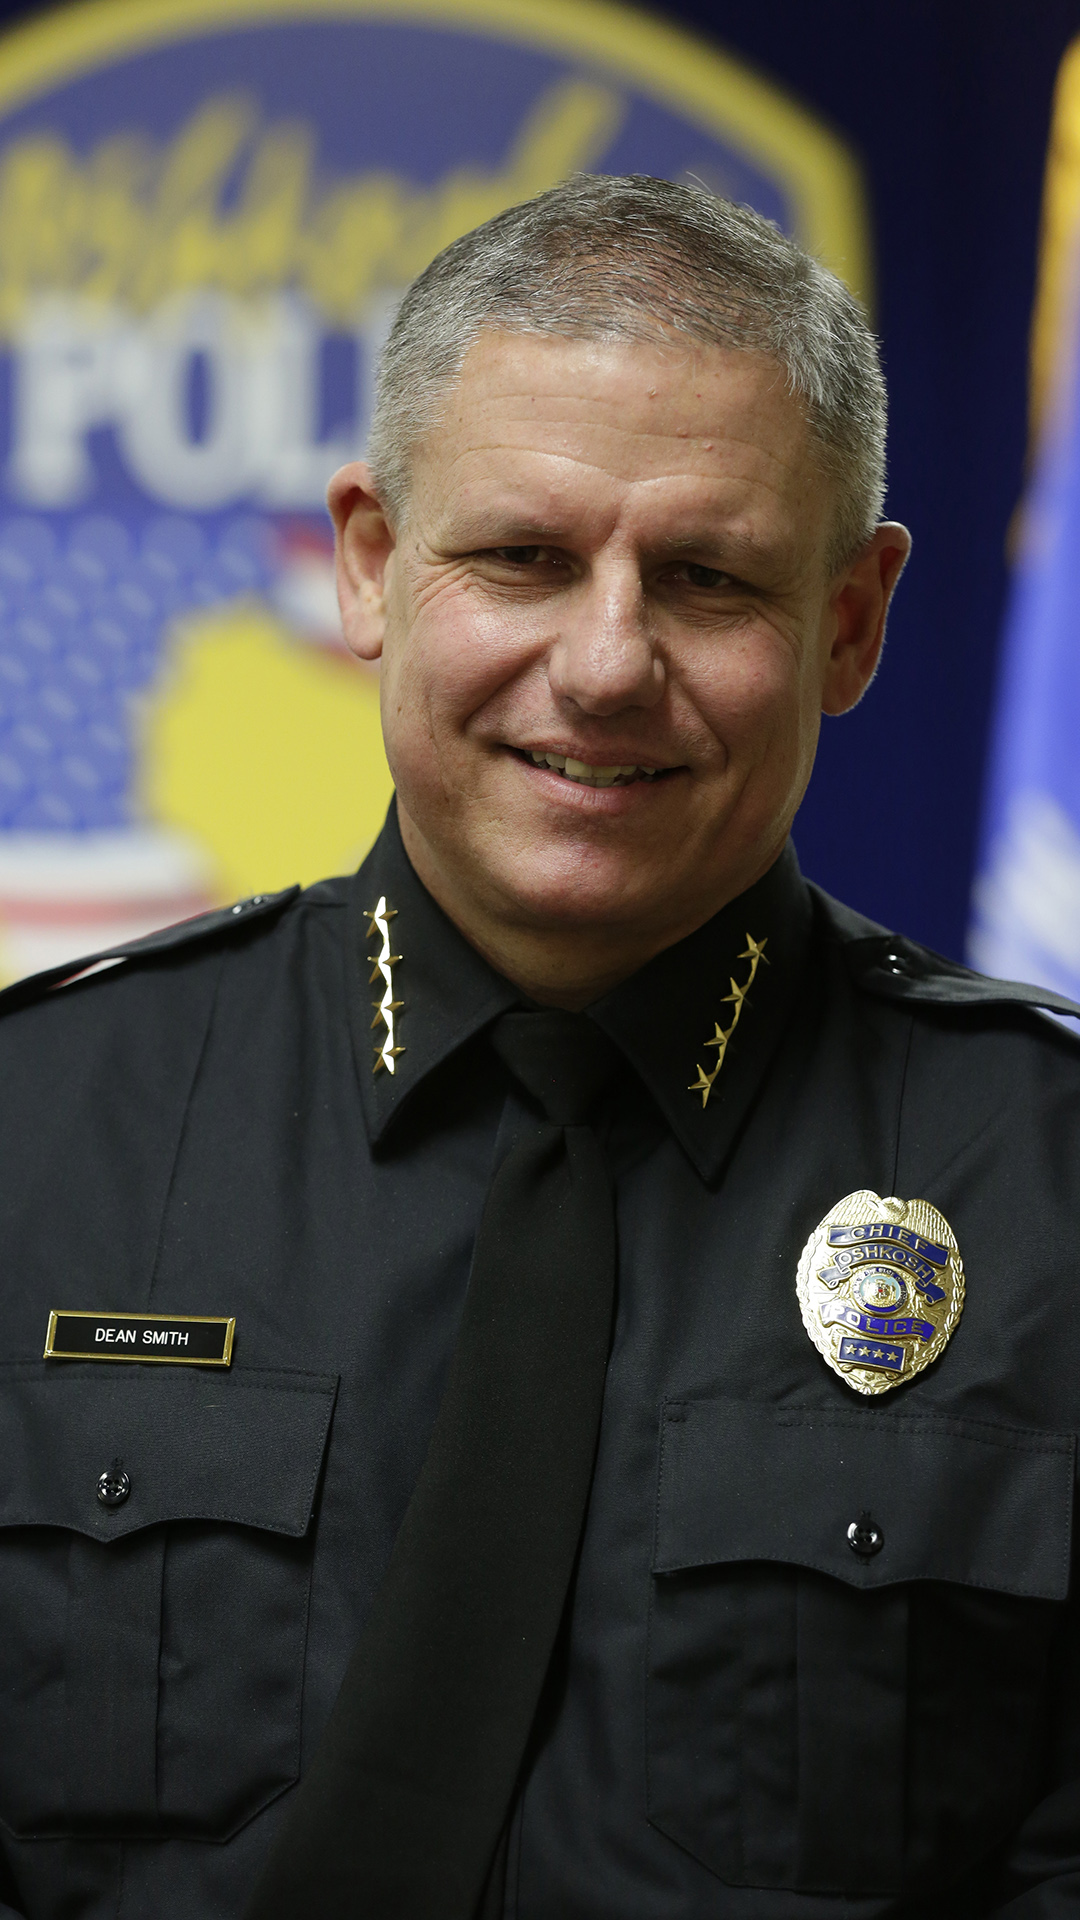 Dean Smith poses for a portrait while wearing a police officer's uniform in front of an out-of-focus Oshkosh Police badge graphic.